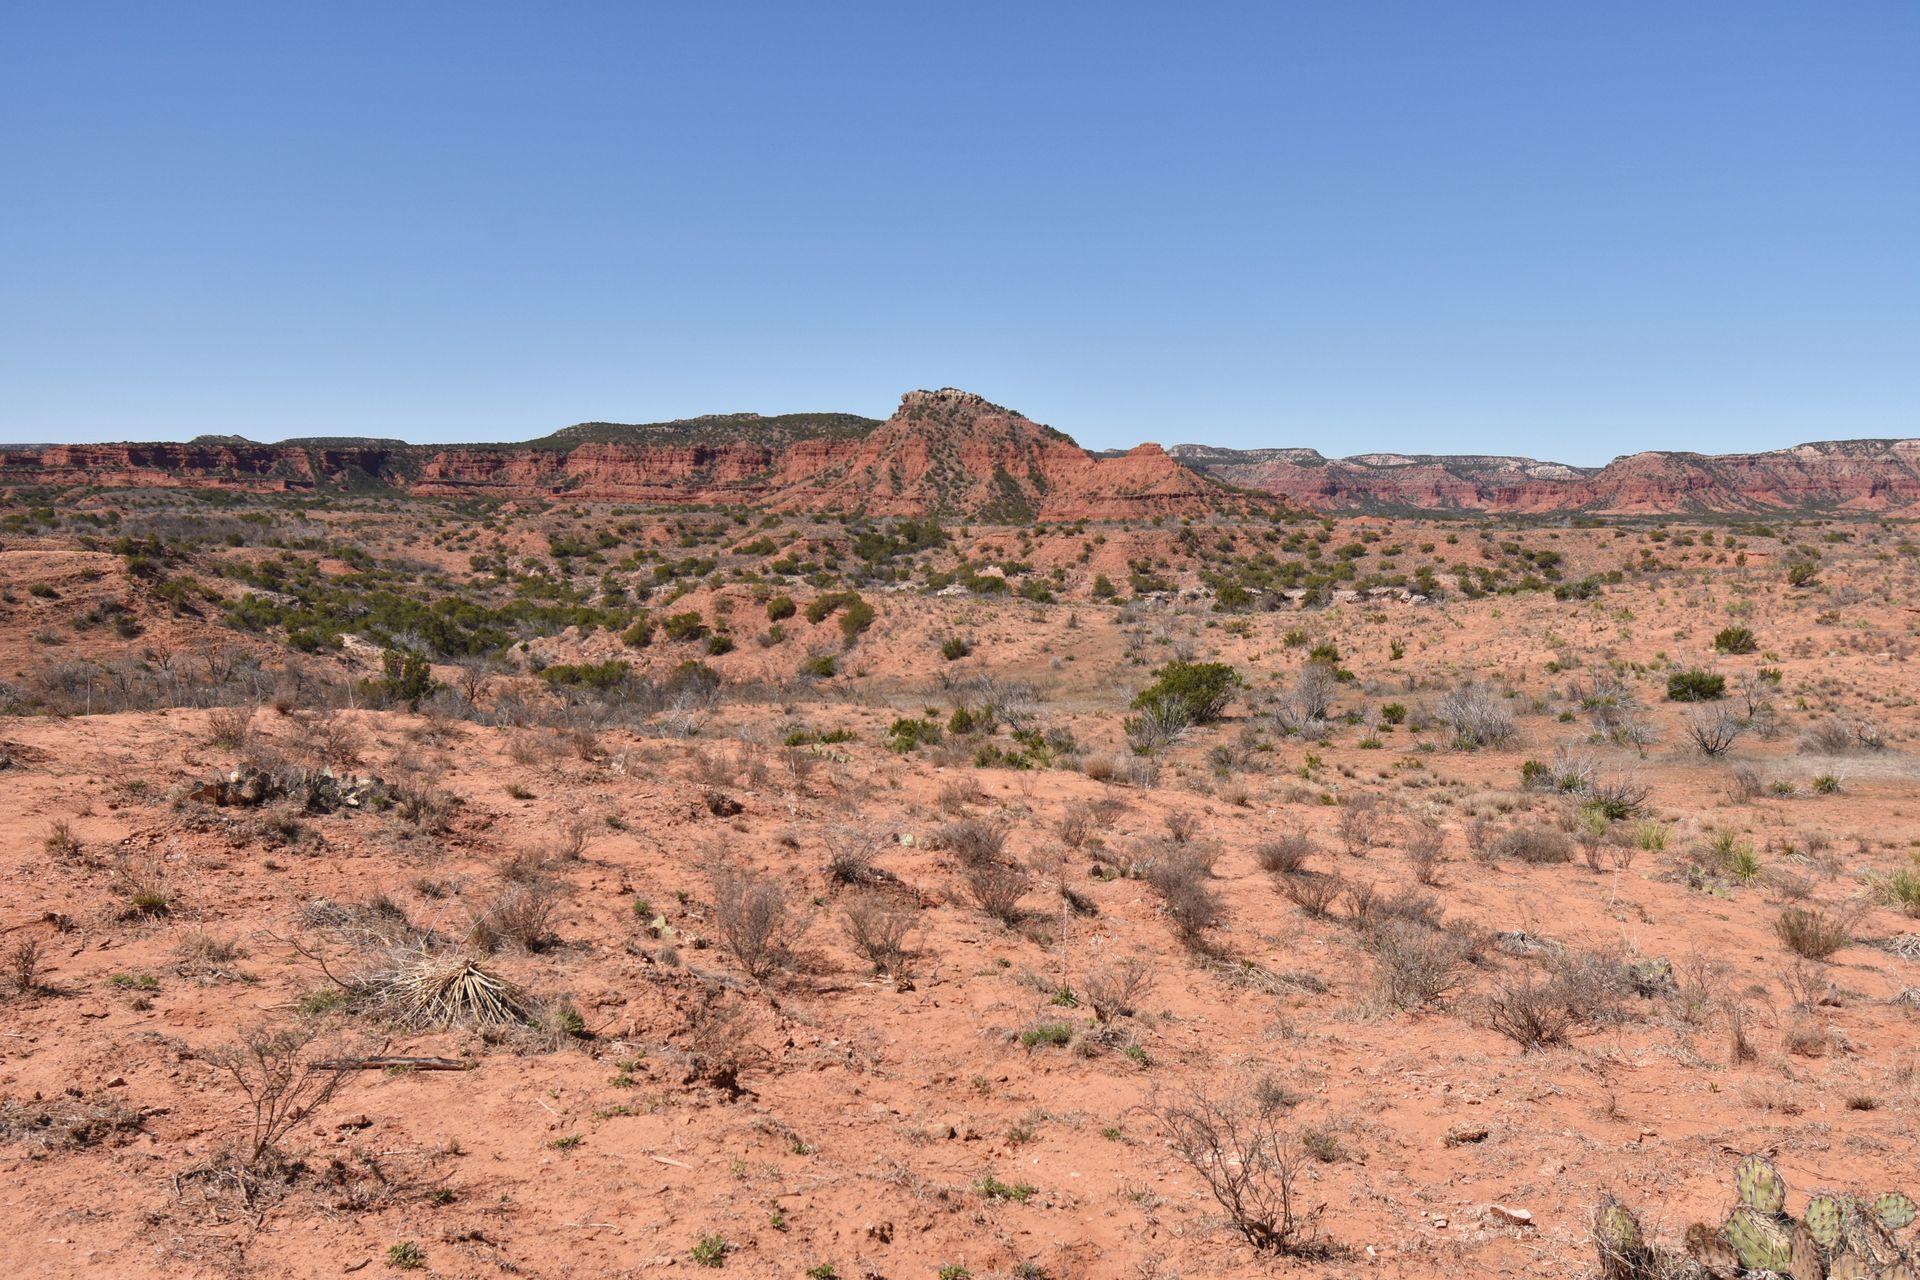 A view of desert and orange rocks in the distance from the Caprock Canyon visitor center